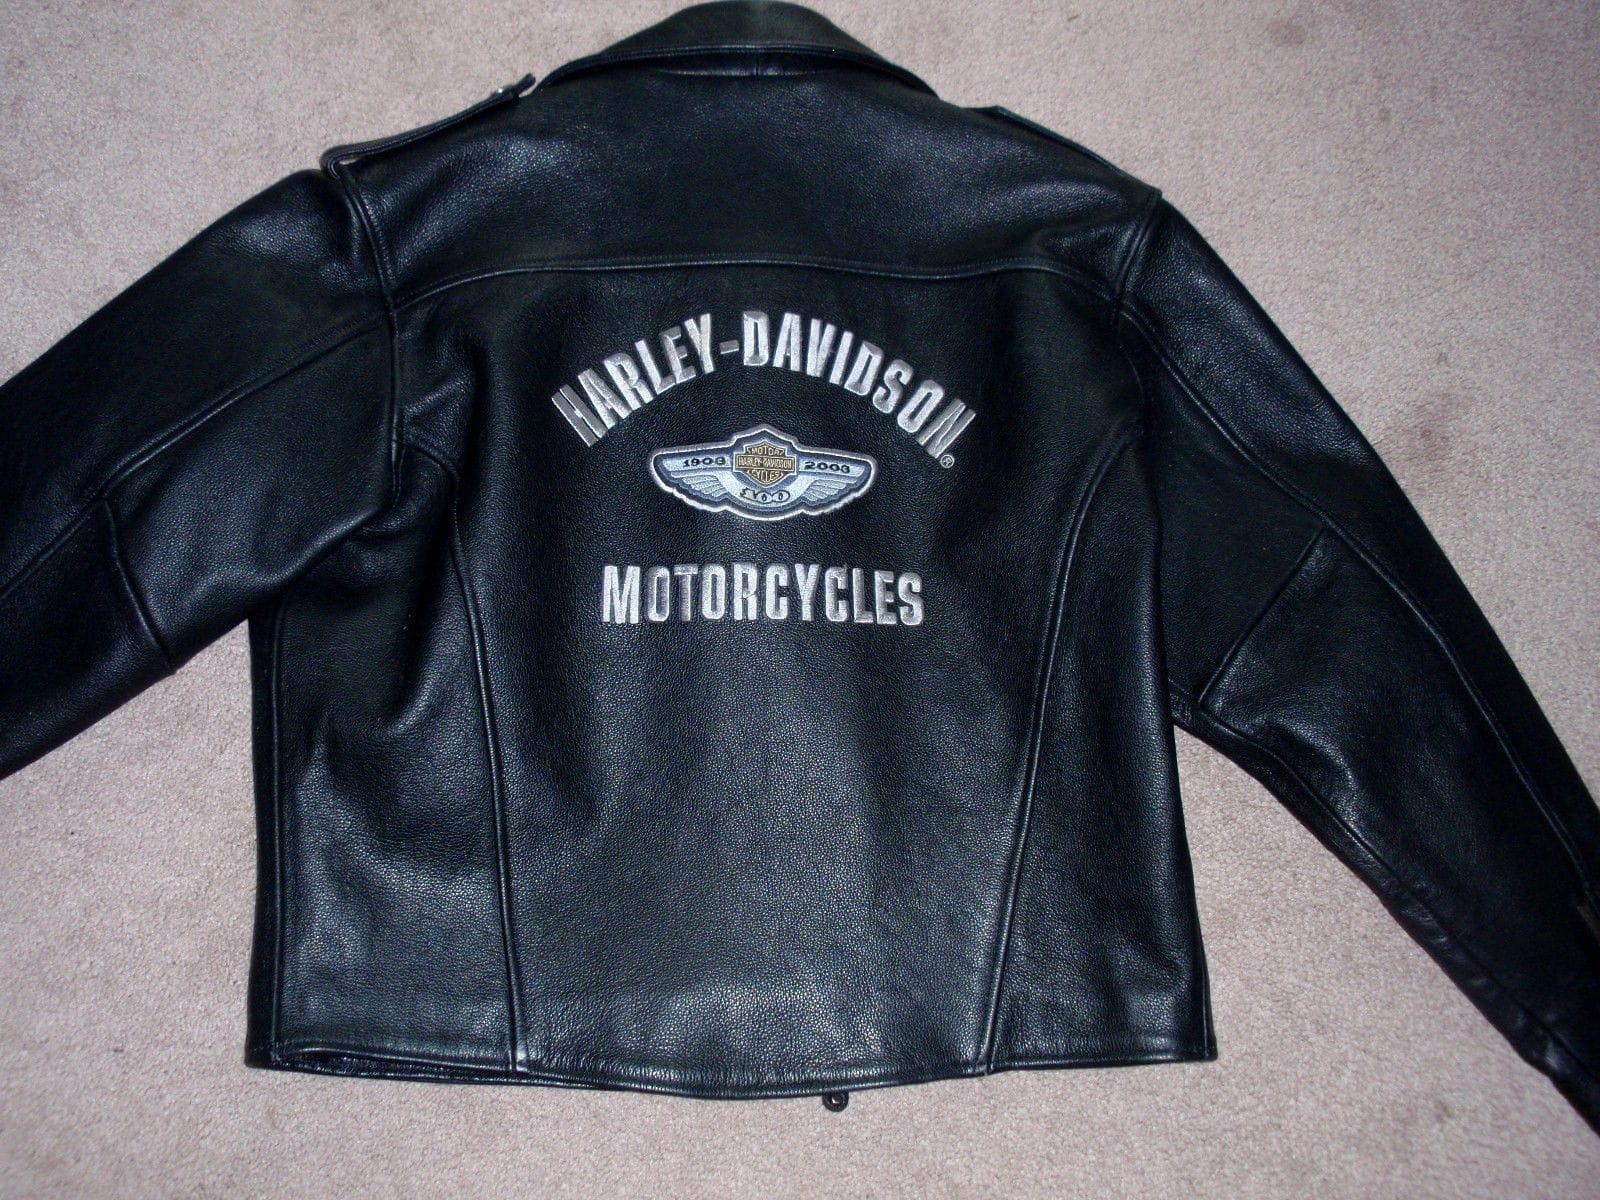 I need expert advice about authentic Harley jackets - Harley Davidson ...